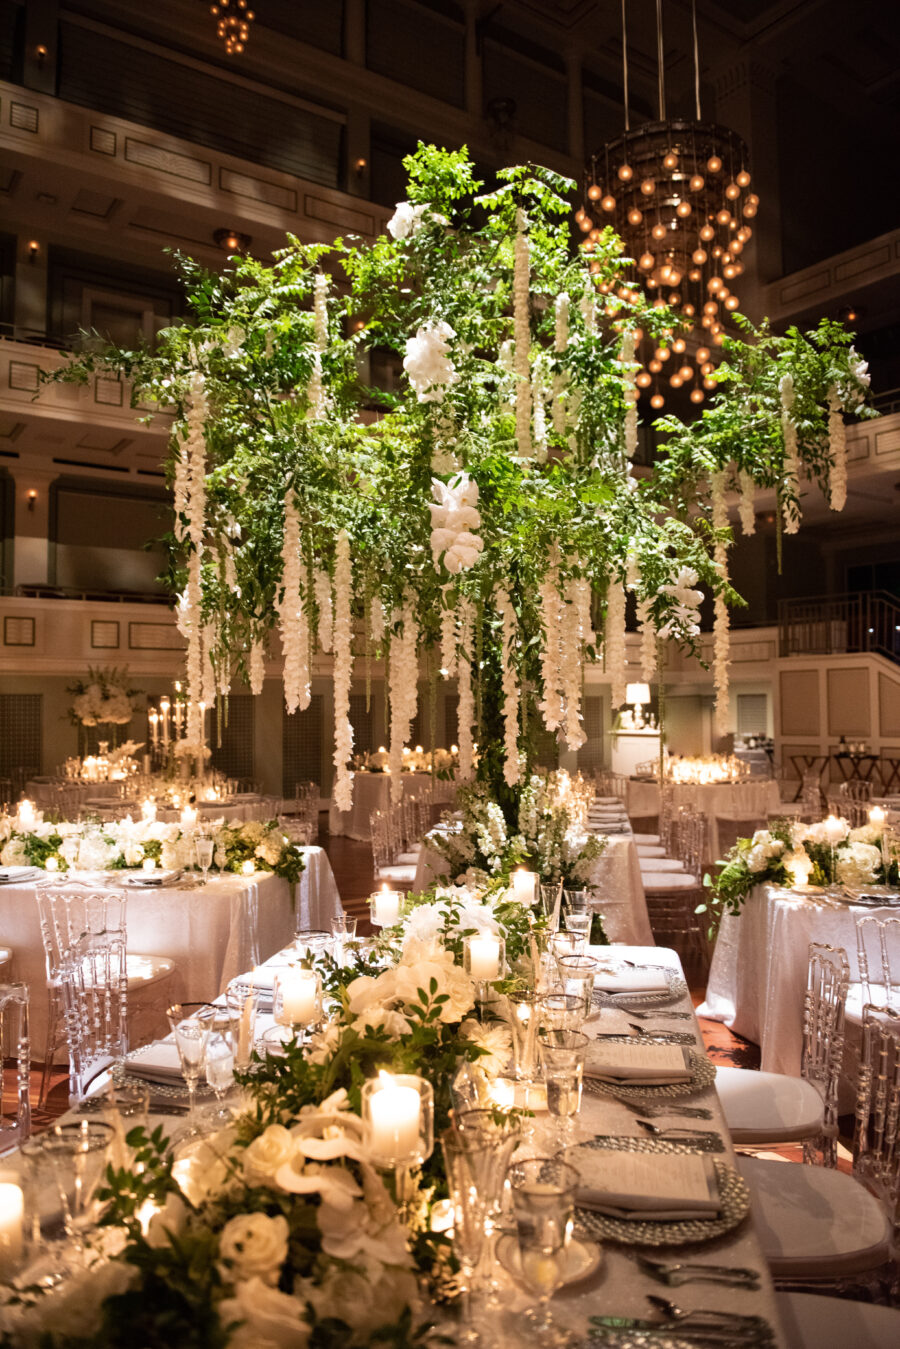 Hanging wedding flowers: Floral Filled Luxurious Wedding by LMA Designs featured on Nashville Bride Guide